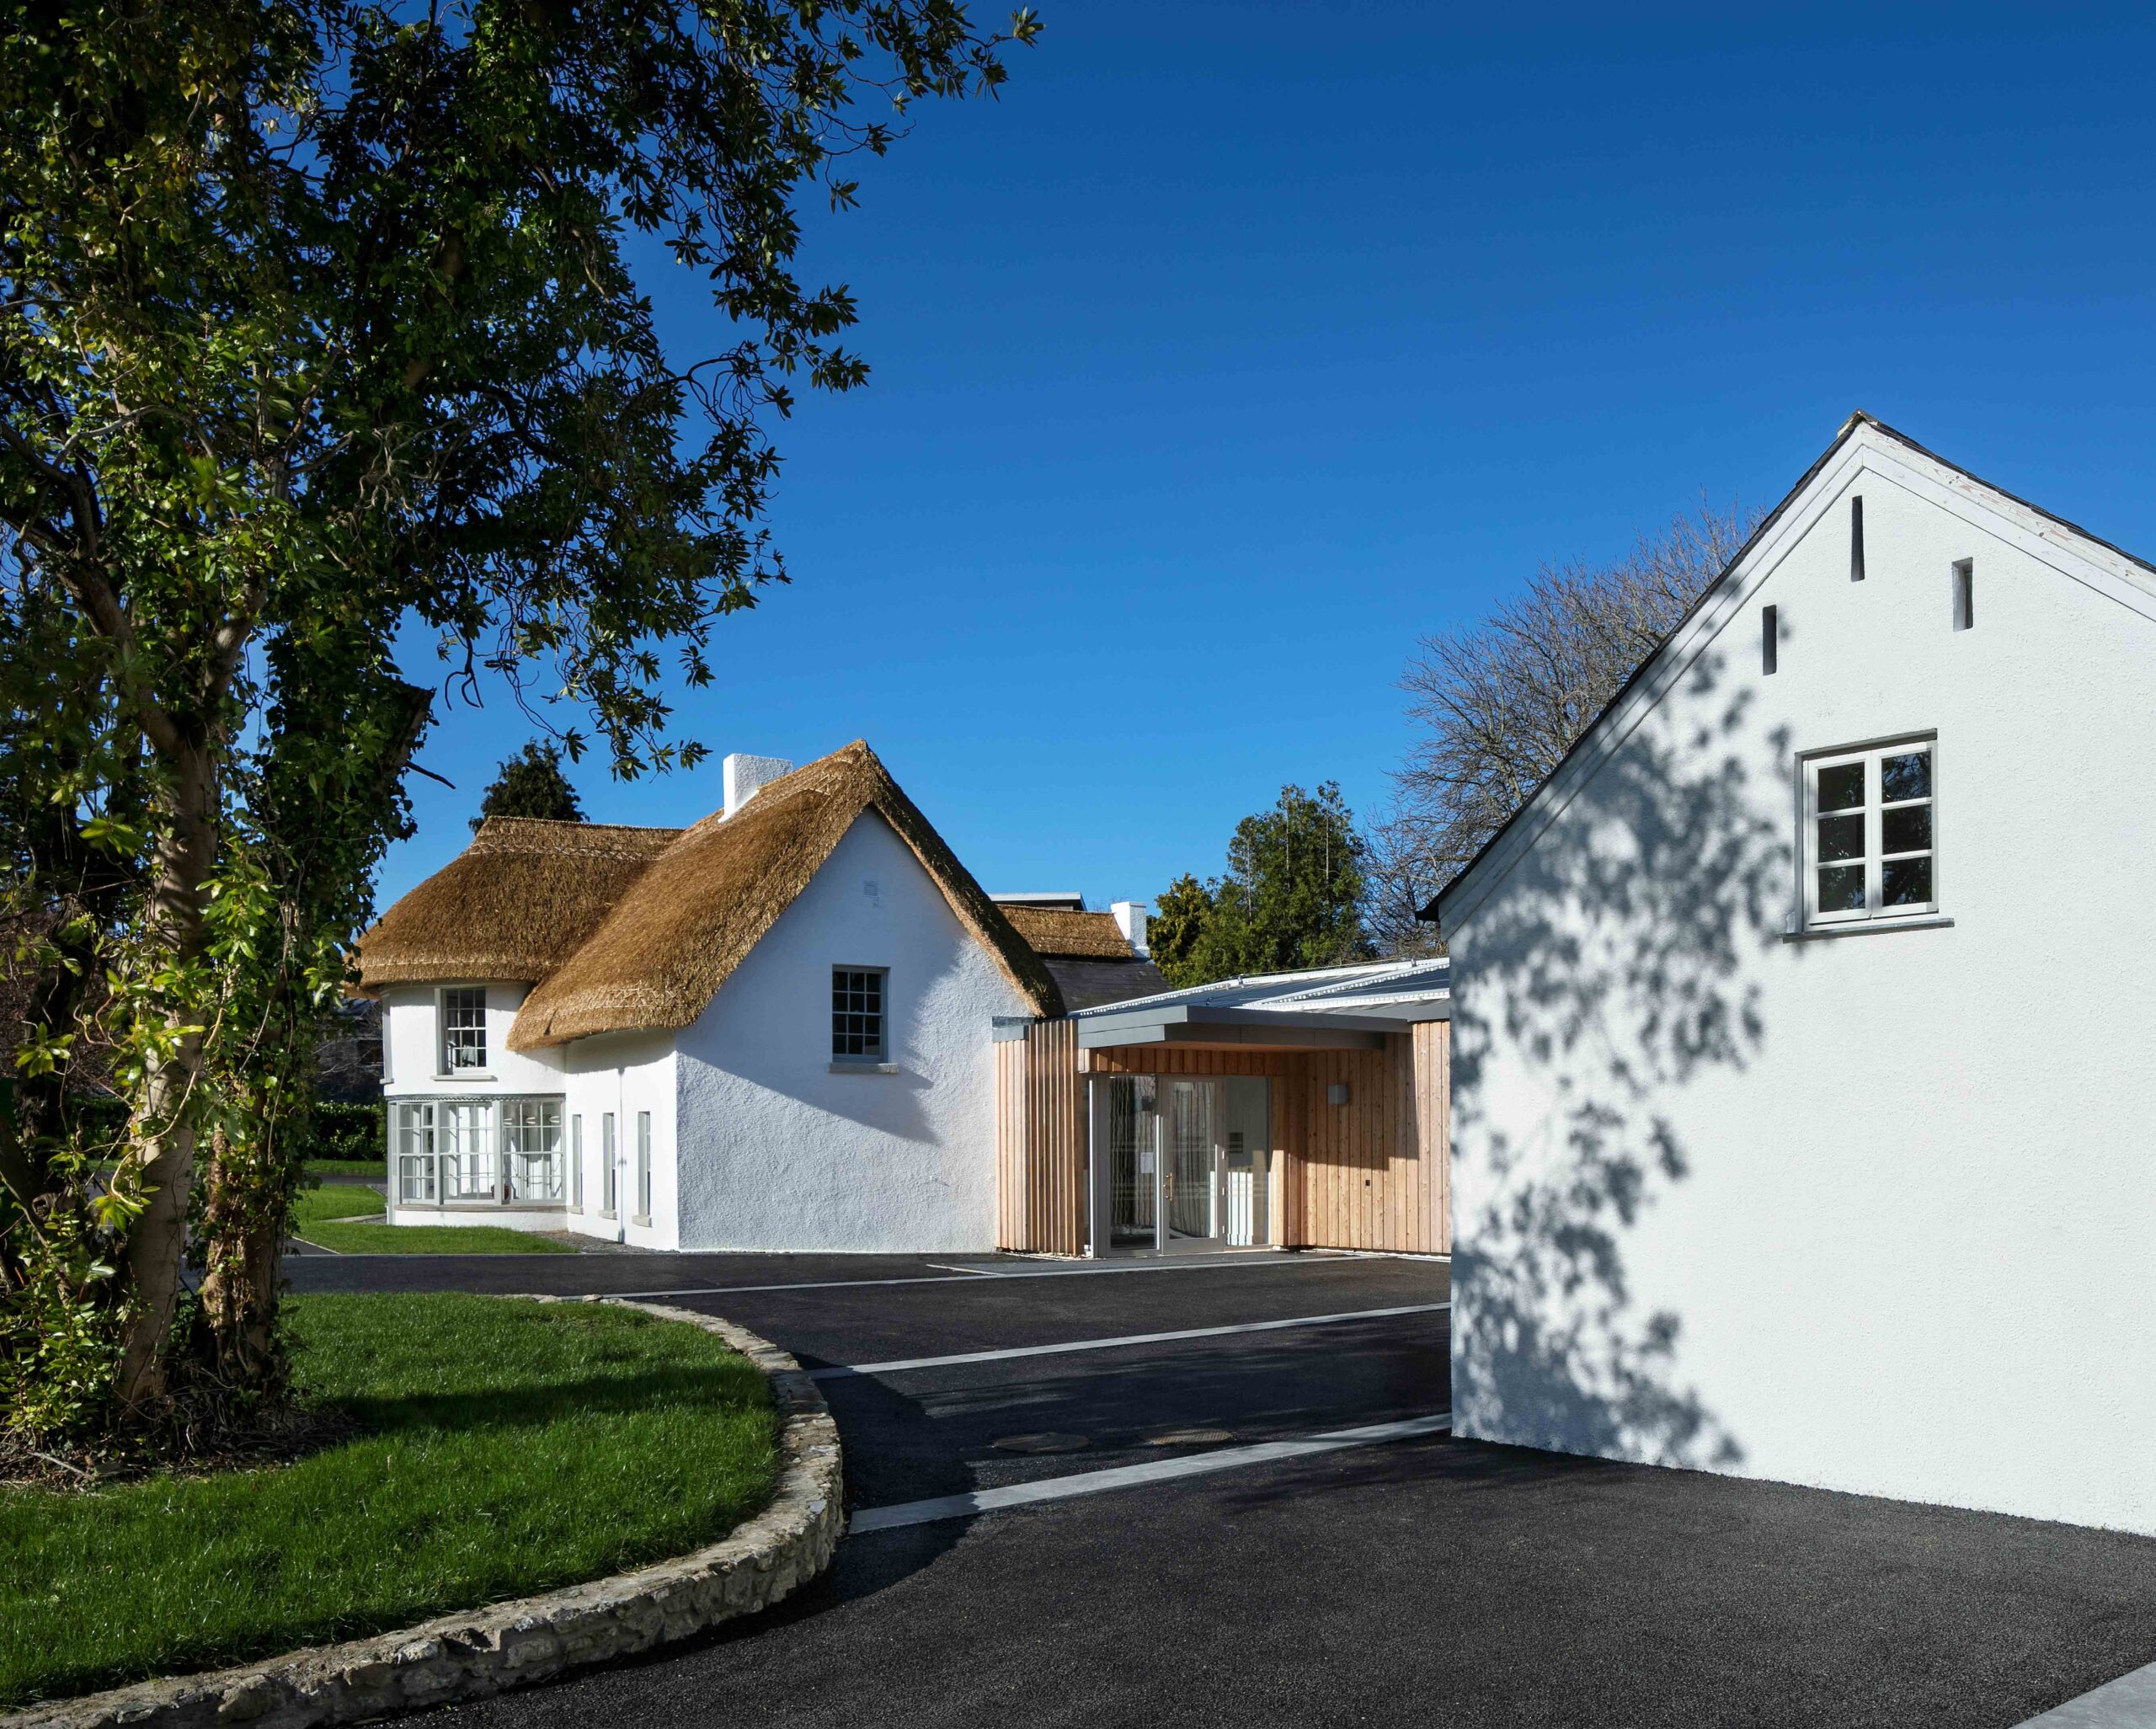 Timber clad extension to restored cottage building